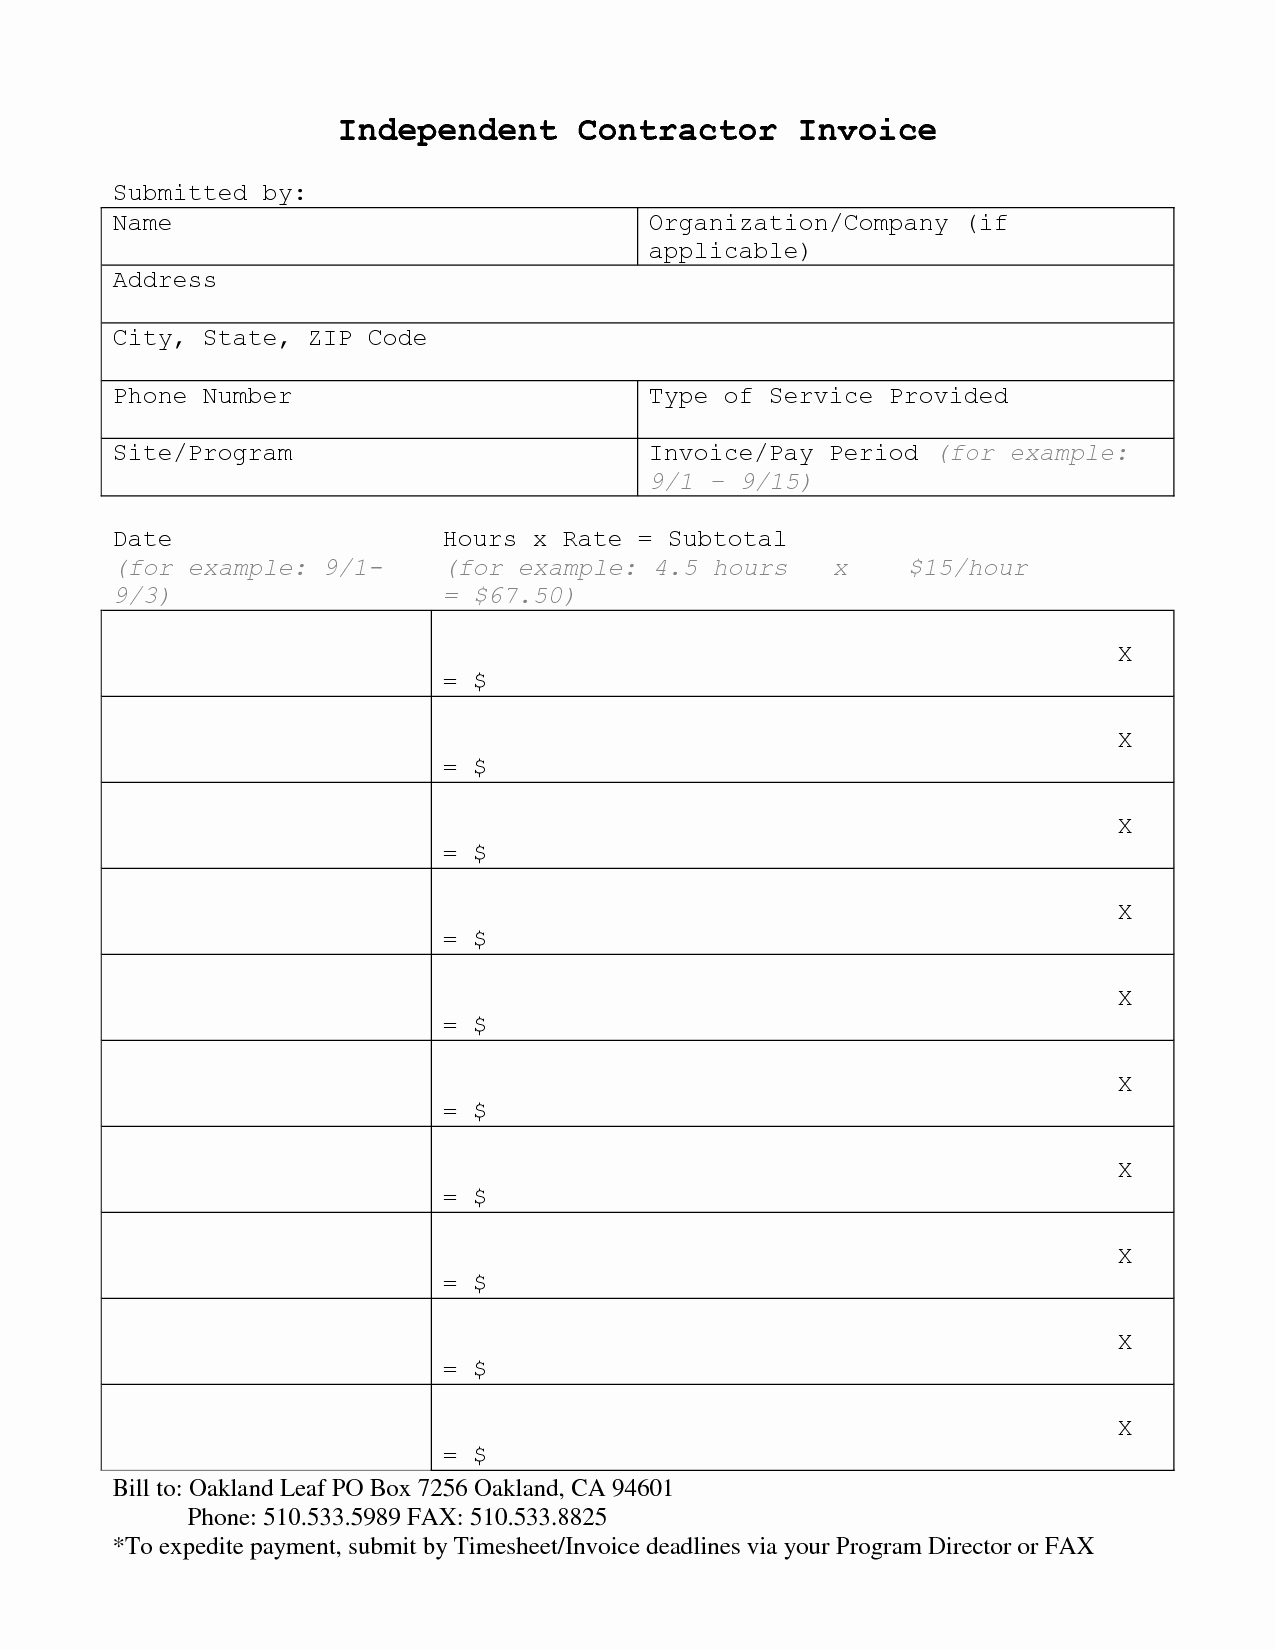 Independent Contractor Invoice Template Pdf Inspirational Independent Contractor Invoice Template